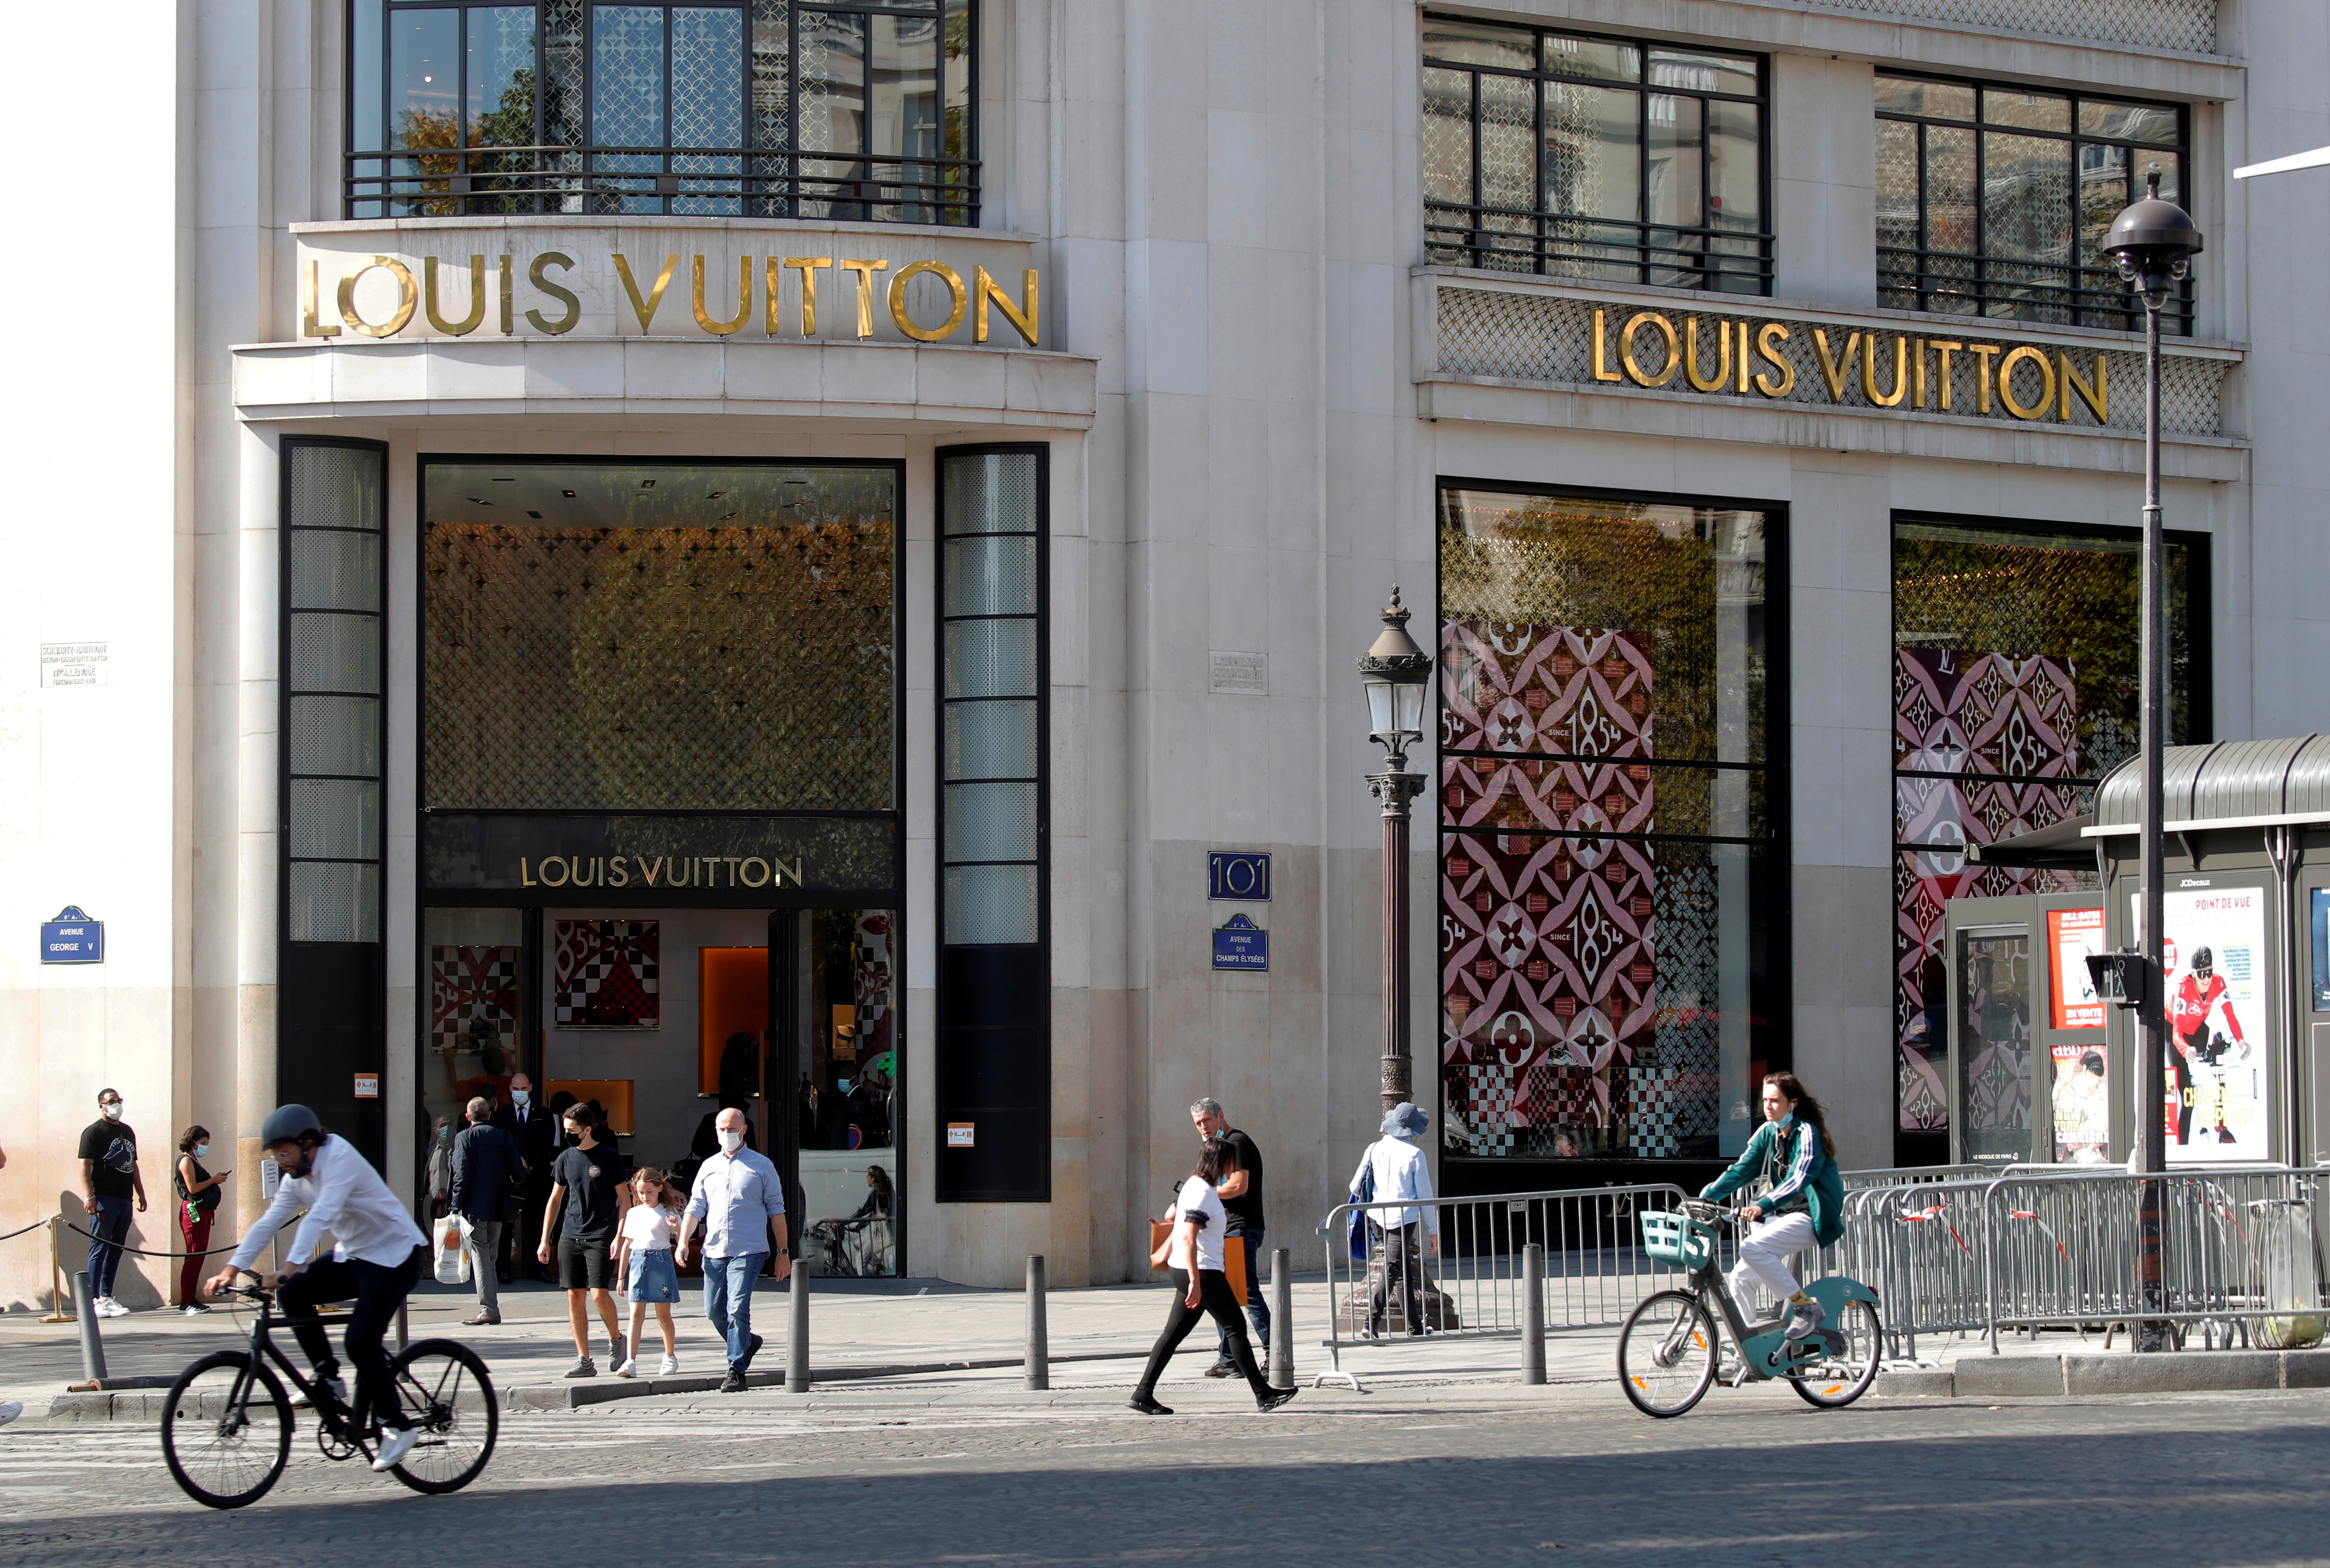 People Waiting In Line To Enter Louis Vuitton Paris France Stock Photo   Download Image Now  iStock